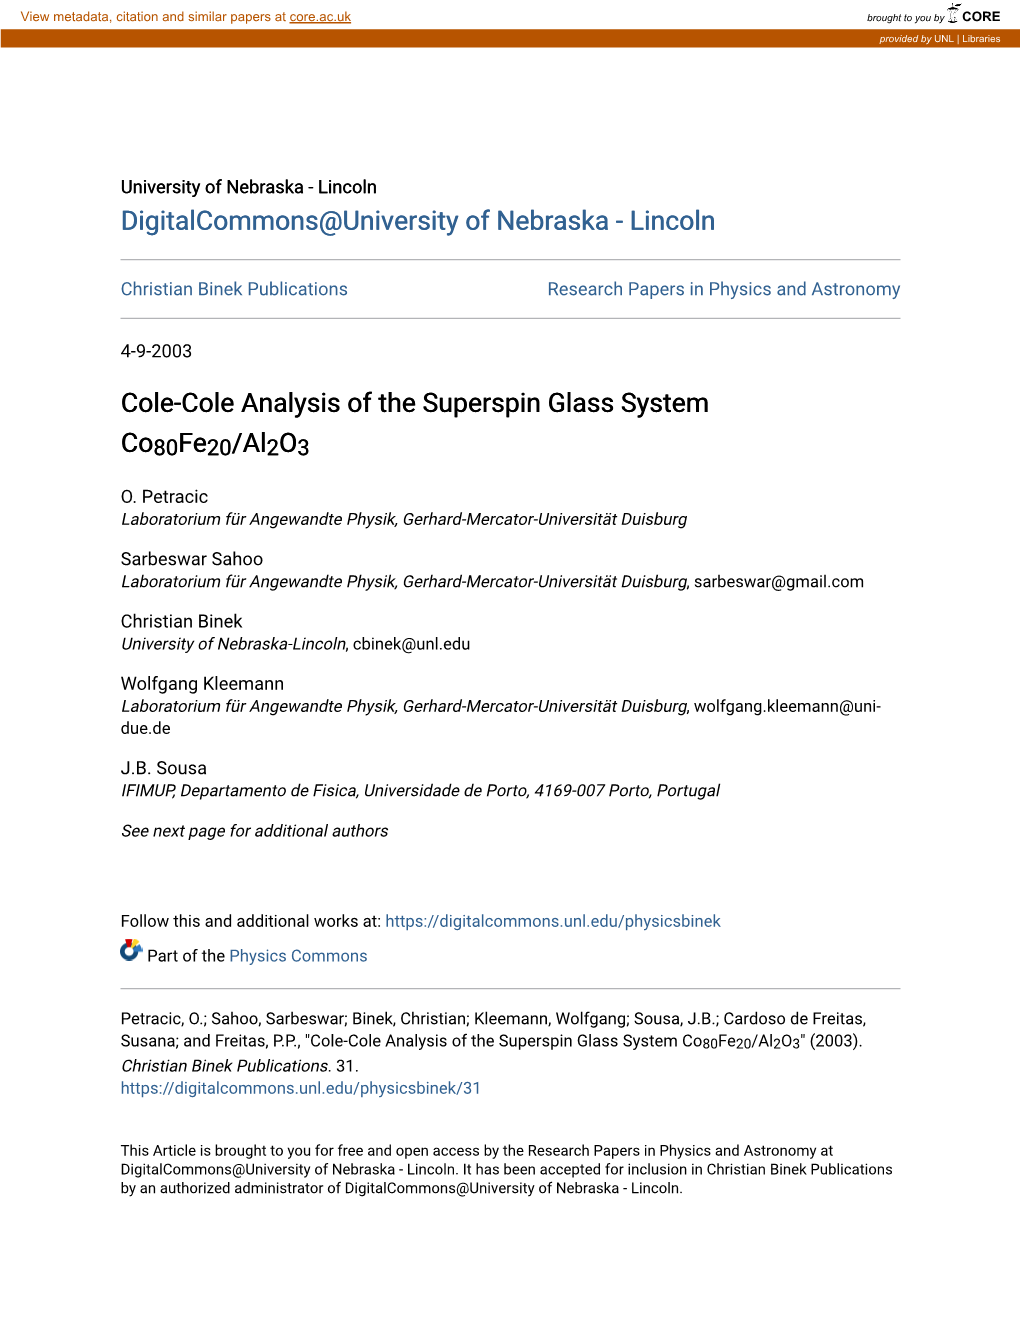 Cole-Cole Analysis of the Superspin Glass System Co80fe20/Al2o3